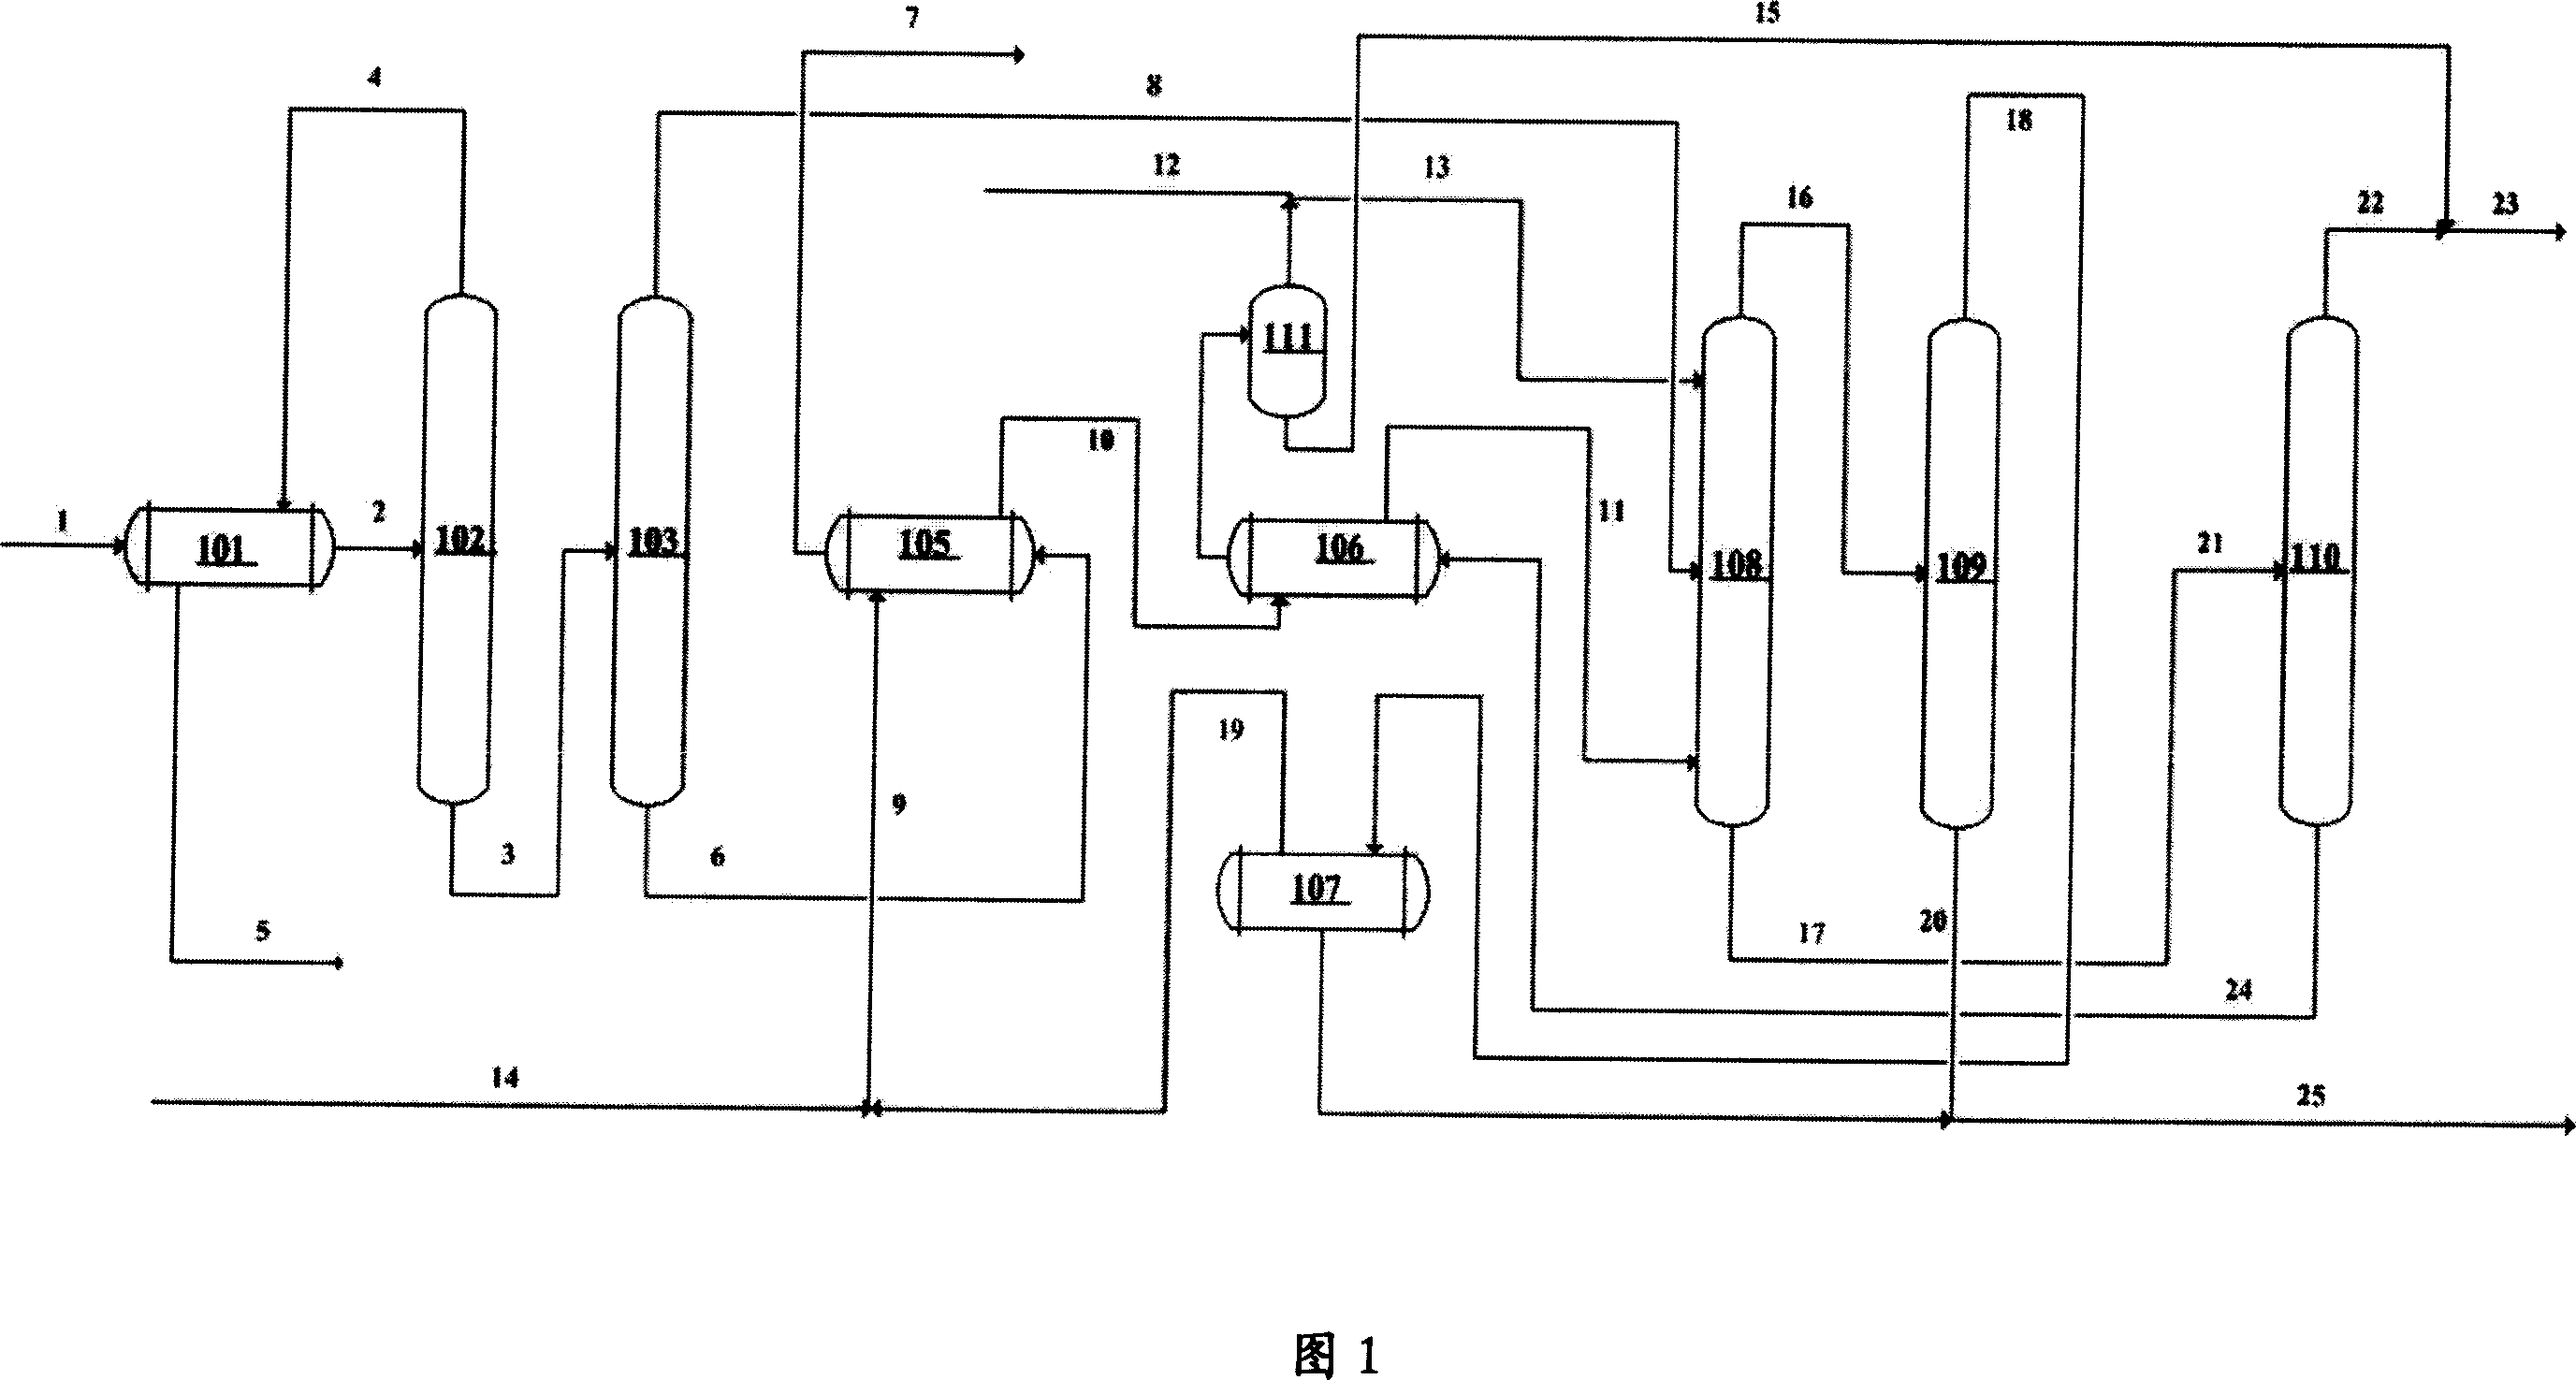 Method of double solvents, benzene substitutive rectification for separating c9 aromatics